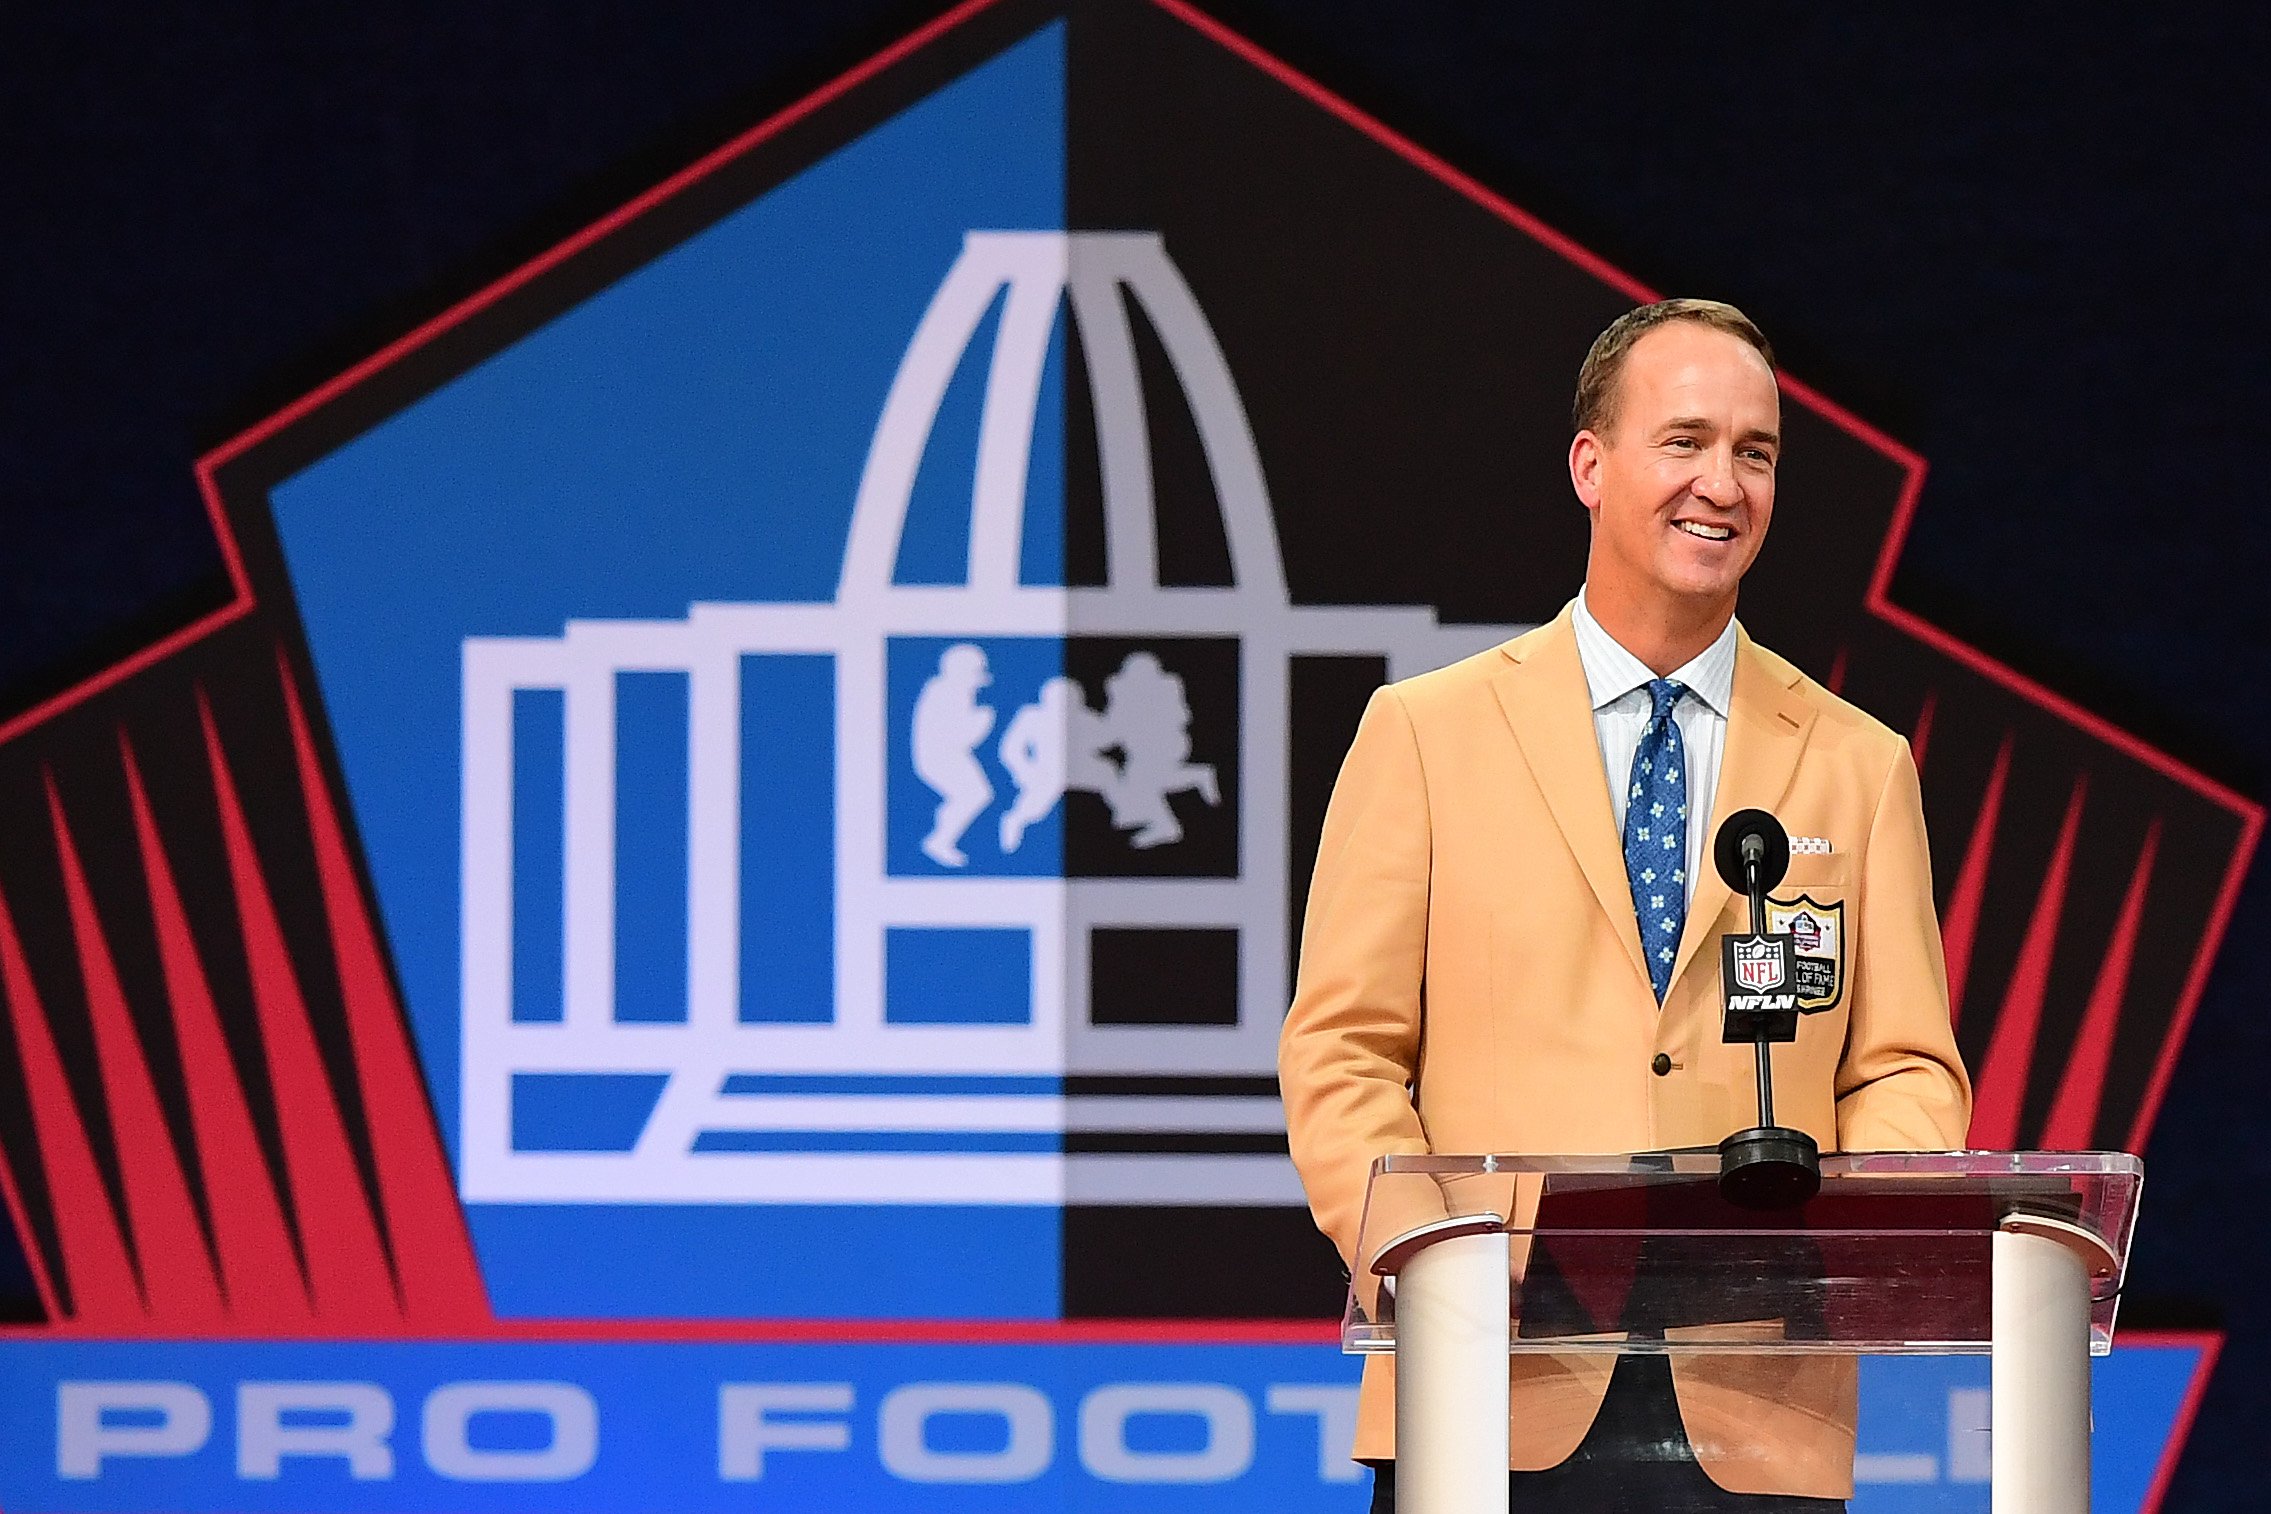 Peyton Manning reacts to the crowd during the NFL Hall of Fame Enshrinement Ceremony at Tom Benson Hall Of Fame Stadium on August 08, 2021, in Canton, Ohio. | Source: Getty Images